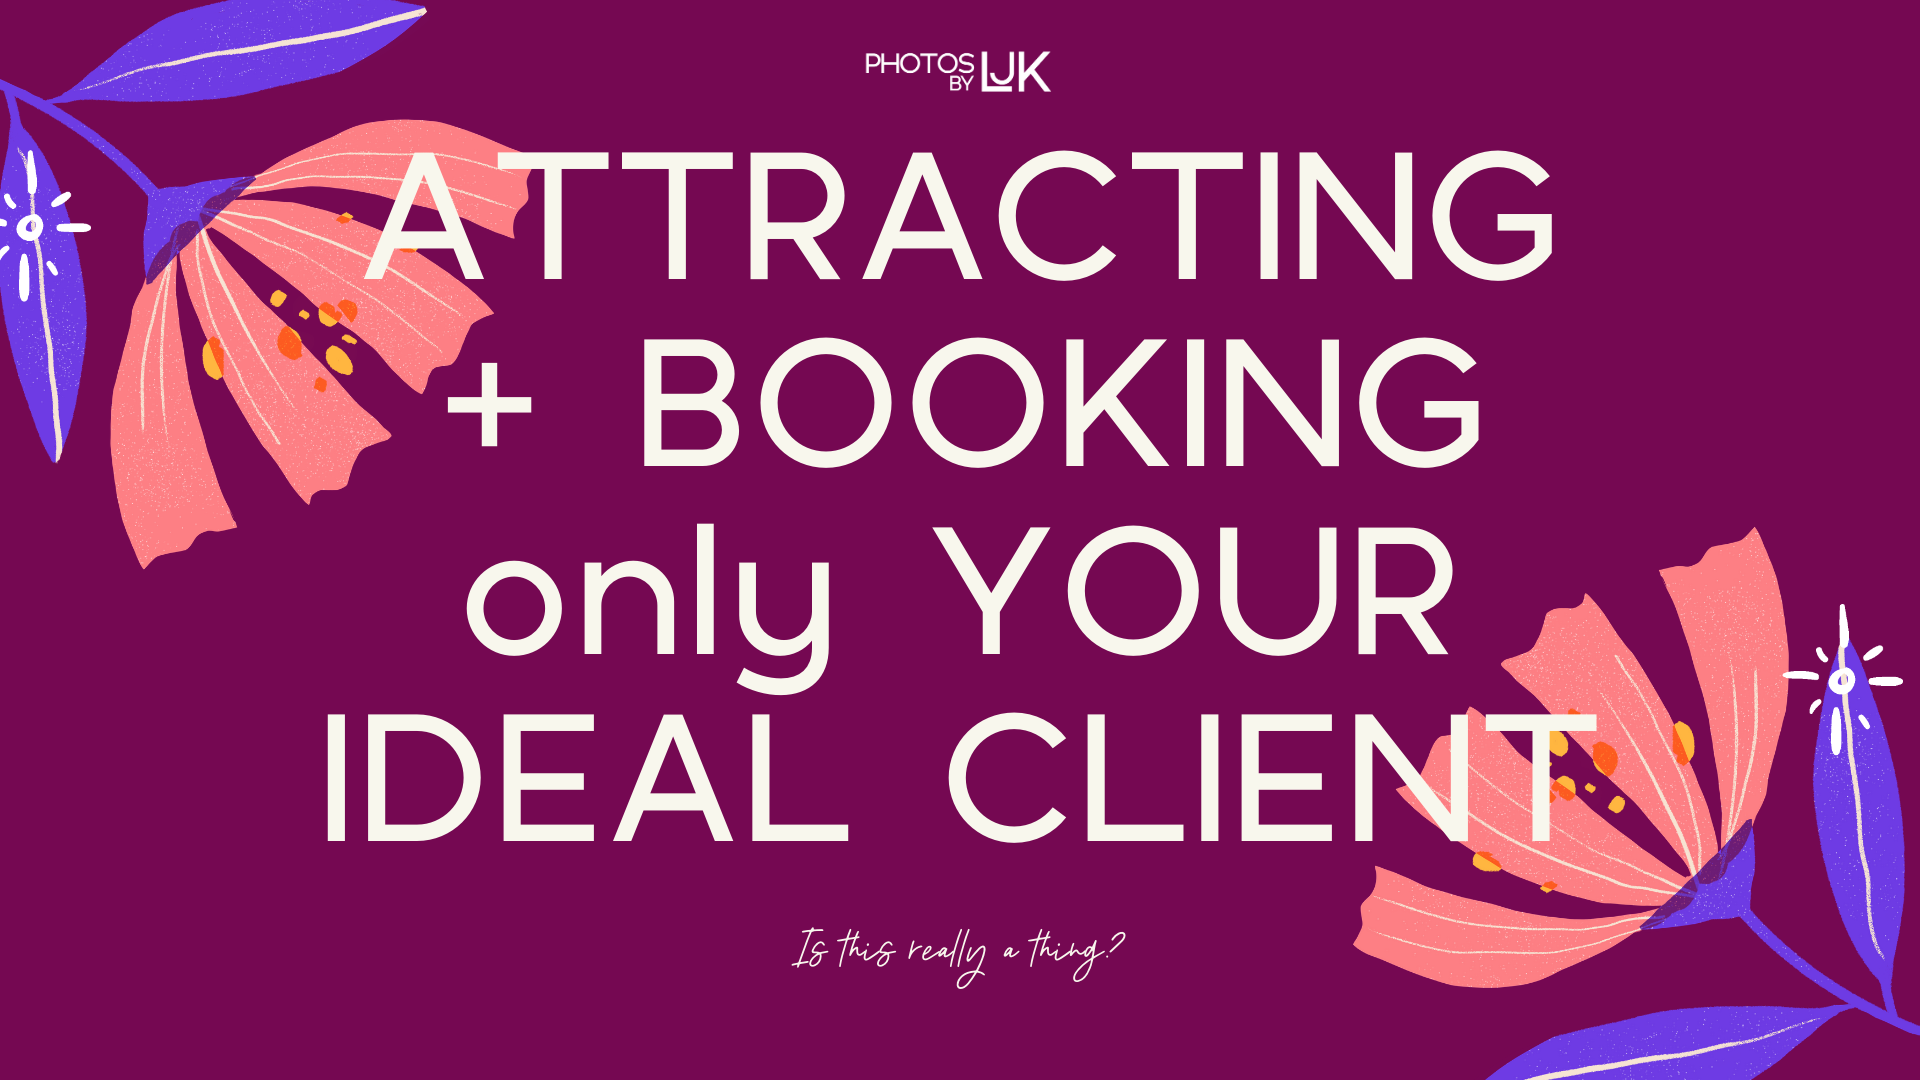 photosbyLJK - Booking ONLY your ideal client